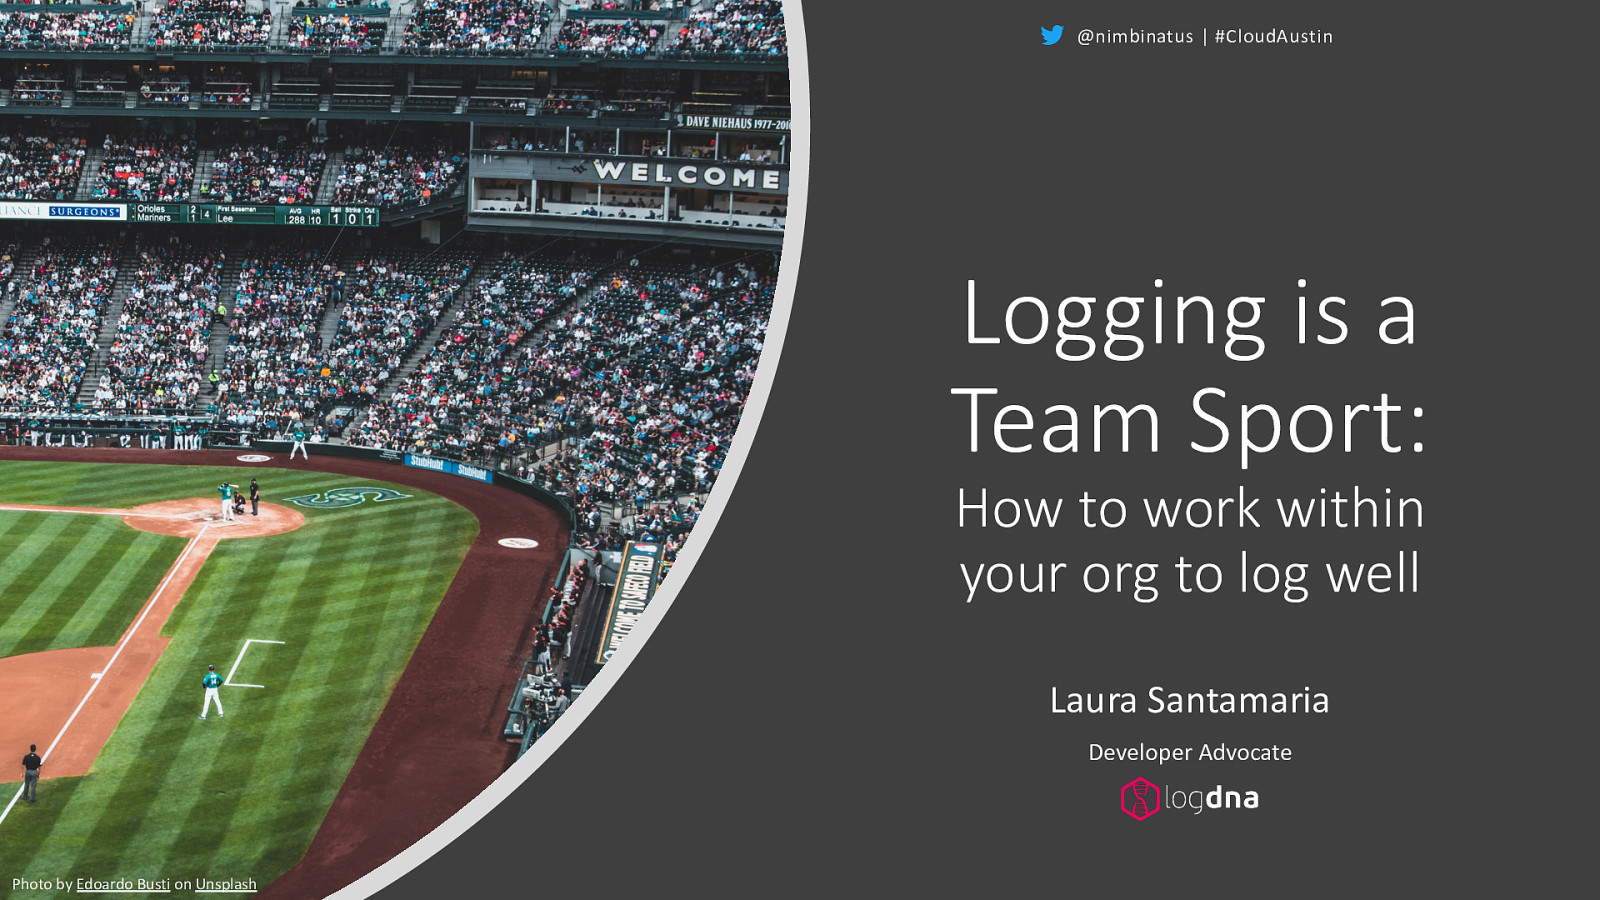 Logging is a Team Sport: How to work within your org to log well